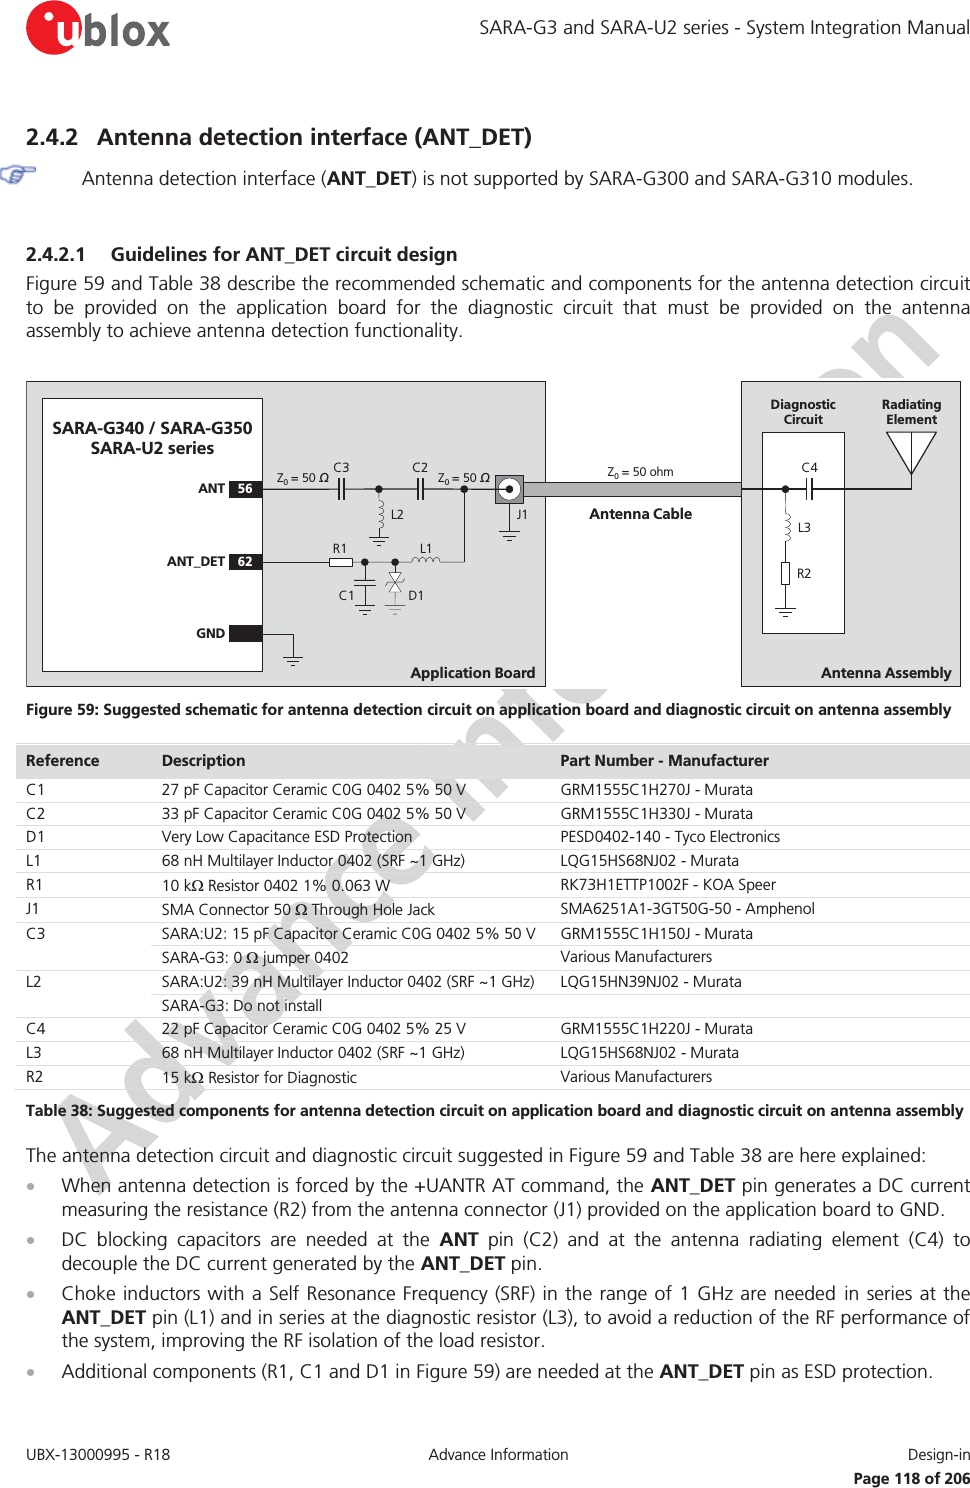 SARA-G3 and SARA-U2 series - System Integration Manual UBX-13000995 - R18  Advance Information  Design-in   Page 118 of 206 2.4.2 Antenna detection interface (ANT_DET)  Antenna detection interface (ANT_DET) is not supported by SARA-G300 and SARA-G310 modules.  2.4.2.1 Guidelines for ANT_DET circuit design Figure 59 and Table 38 describe the recommended schematic and components for the antenna detection circuit to be provided on the application board for the diagnostic circuit that must be provided on the antenna assembly to achieve antenna detection functionality.  Application BoardAntenna CableSARA-G340 / SARA-G350 SARA-U2 series56ANT62ANT_DETR1C1 D1L1C2J1Z0= 50 ΩZ0= 50 ΩZ0= 50 ohmAntenna AssemblyR2C4L3Radiating ElementDiagnostic CircuitGNDL2C3 Figure 59: Suggested schematic for antenna detection circuit on application board and diagnostic circuit on antenna assembly Reference  Description  Part Number - Manufacturer C1 27 pF Capacitor Ceramic C0G 0402 5% 50 V GRM1555C1H270J - Murata C2 33 pF Capacitor Ceramic C0G 0402 5% 50 V GRM1555C1H330J - Murata D1 Very Low Capacitance ESD Protection PESD0402-140 - Tyco Electronics L1 68 nH Multilayer Inductor 0402 (SRF ~1 GHz) LQG15HS68NJ02 - Murata R1 10 k: Resistor 0402 1% 0.063 W RK73H1ETTP1002F - KOA Speer J1 SMA Connector 50 : Through Hole Jack SMA6251A1-3GT50G-50 - Amphenol C3 SARA:U2: 15 pF Capacitor Ceramic C0G 0402 5% 50 V  GRM1555C1H150J - Murata  SARA-G3: 0 : jumper 0402 Various Manufacturers L2 SARA:U2: 39 nH Multilayer Inductor 0402 (SRF ~1 GHz) LQG15HN39NJ02 - Murata  SARA-G3: Do not install  C4 22 pF Capacitor Ceramic C0G 0402 5% 25 V  GRM1555C1H220J - Murata L3 68 nH Multilayer Inductor 0402 (SRF ~1 GHz) LQG15HS68NJ02 - Murata R2 15 k: Resistor for Diagnostic Various Manufacturers Table 38: Suggested components for antenna detection circuit on application board and diagnostic circuit on antenna assembly The antenna detection circuit and diagnostic circuit suggested in Figure 59 and Table 38 are here explained: x When antenna detection is forced by the +UANTR AT command, the ANT_DET pin generates a DC current measuring the resistance (R2) from the antenna connector (J1) provided on the application board to GND. x DC blocking capacitors are needed at the ANT pin (C2) and at the antenna radiating element (C4) to decouple the DC current generated by the ANT_DET pin. x Choke inductors with a Self Resonance Frequency (SRF) in the range of 1 GHz are needed in series at the ANT_DET pin (L1) and in series at the diagnostic resistor (L3), to avoid a reduction of the RF performance of the system, improving the RF isolation of the load resistor.  x Additional components (R1, C1 and D1 in Figure 59) are needed at the ANT_DET pin as ESD protection. 